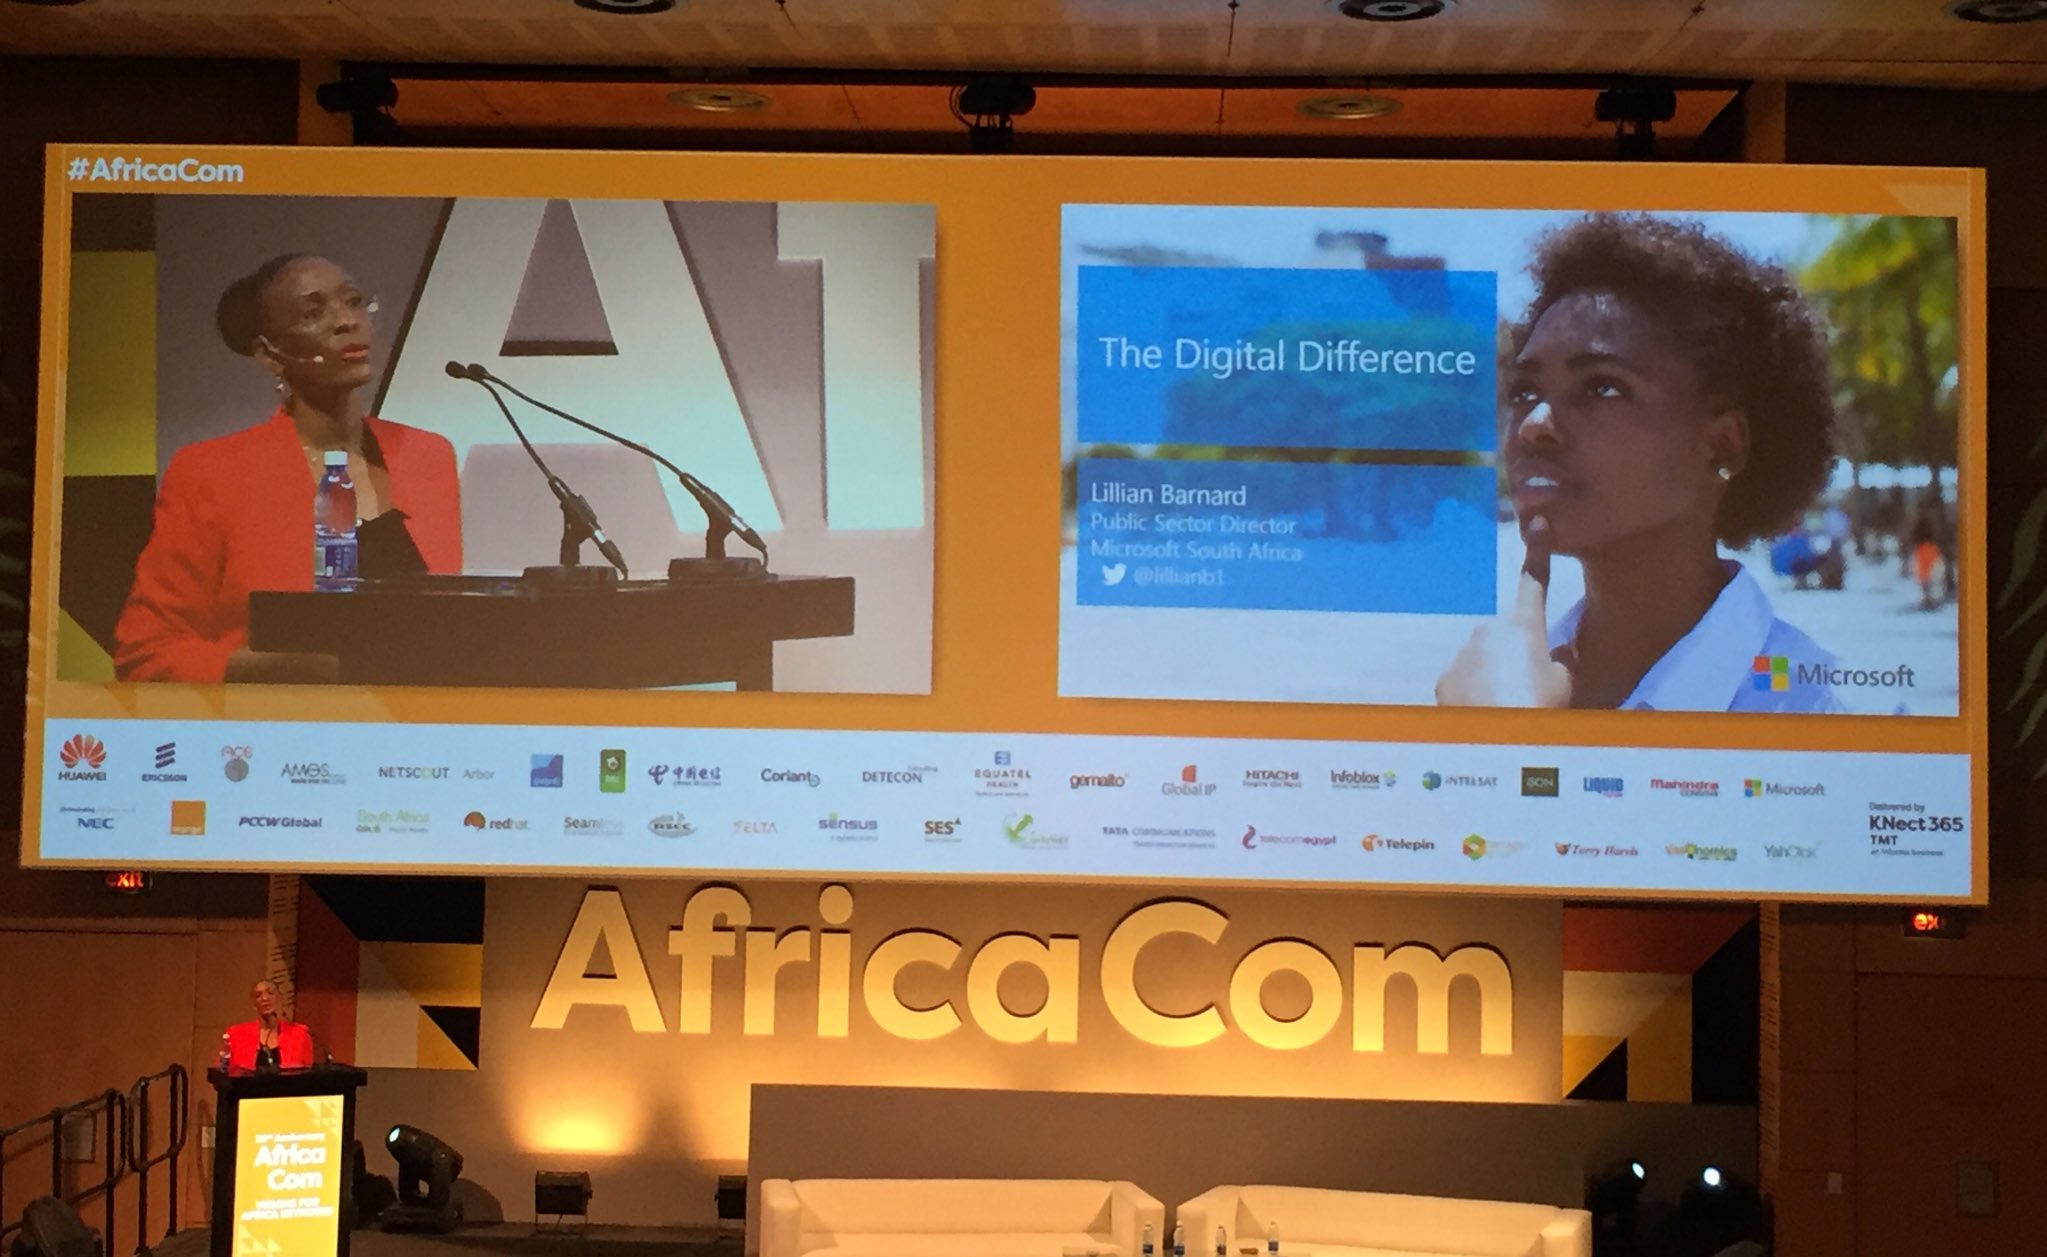 #AfricaCom – Microsoft says Digital Transformation is critical to the success of African businesses at AfricaCom 2017